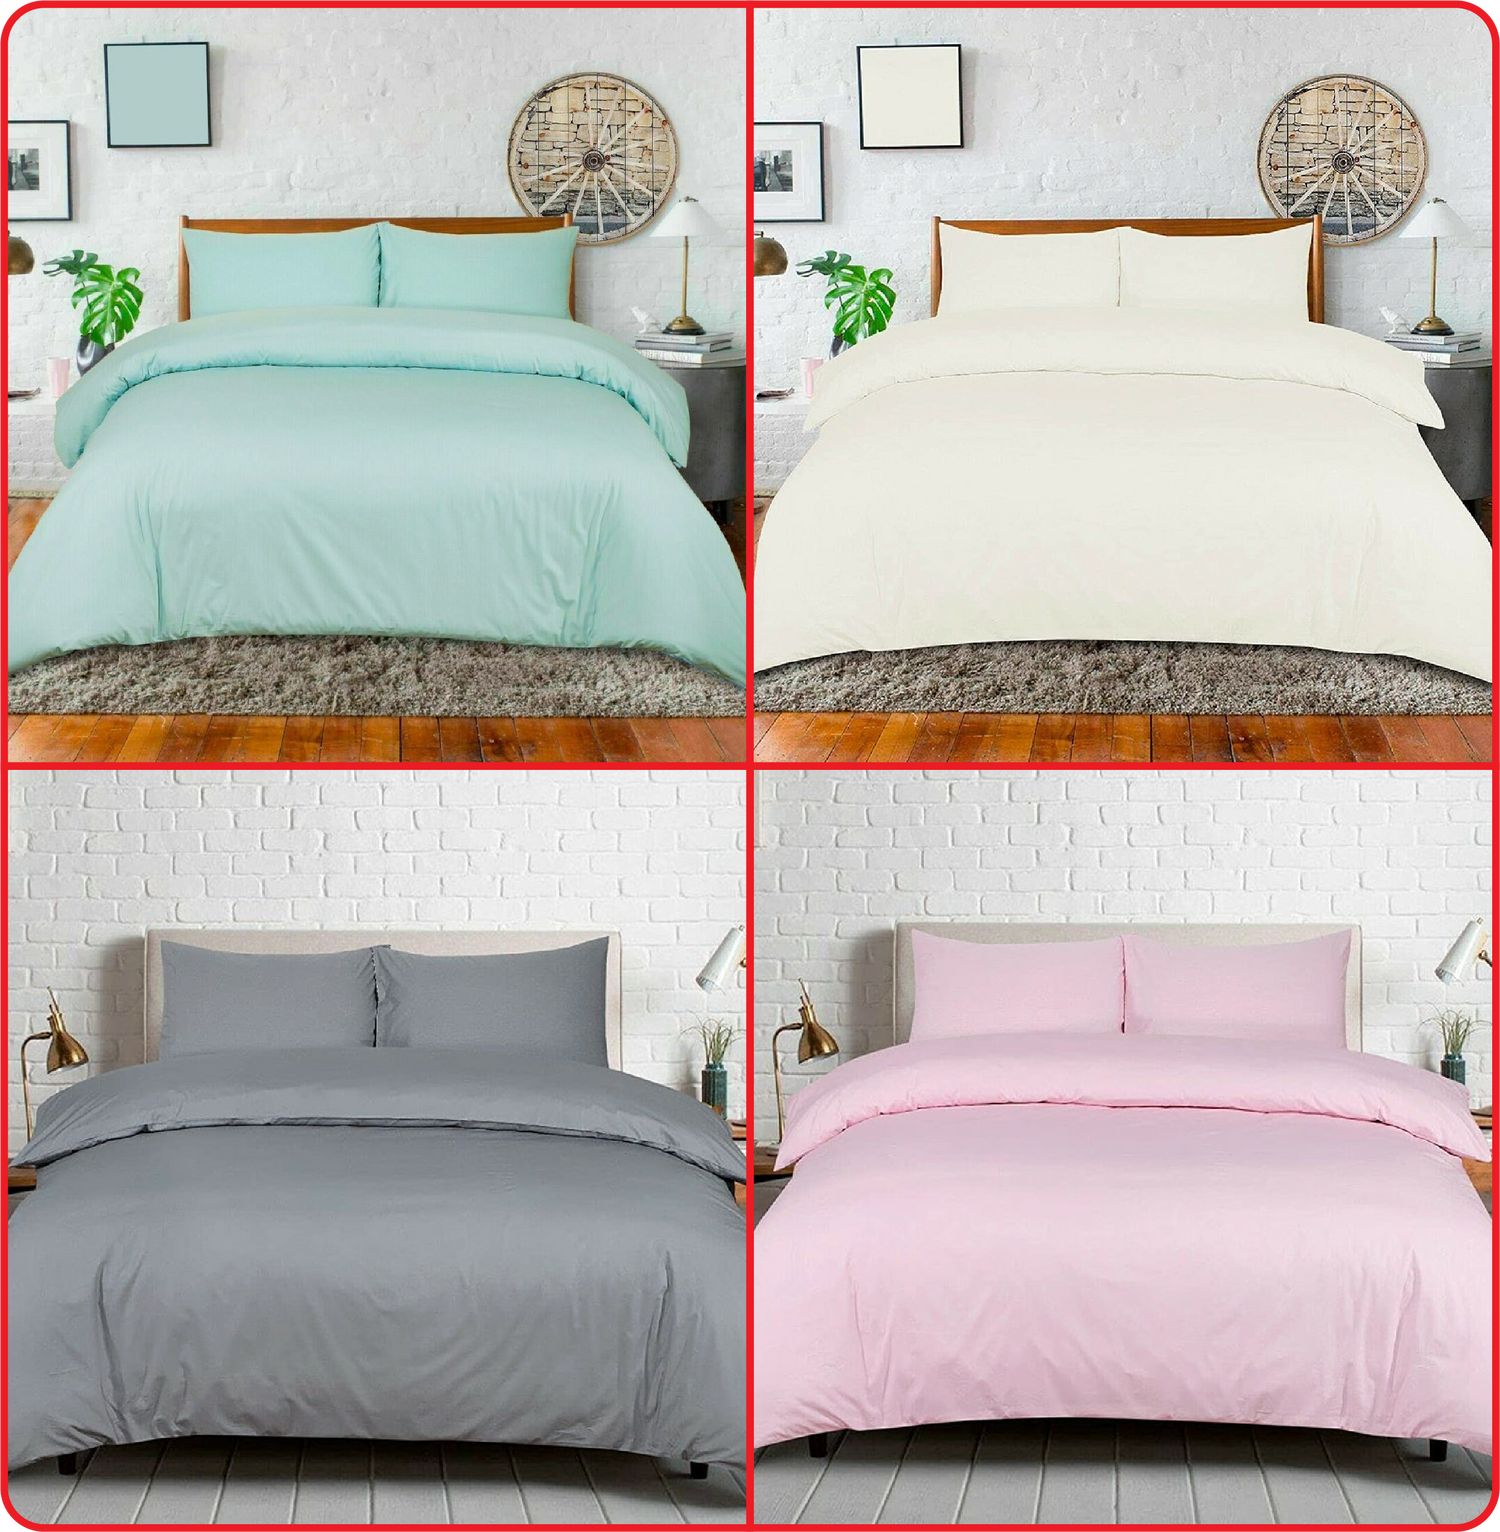 Duvet covers and sets